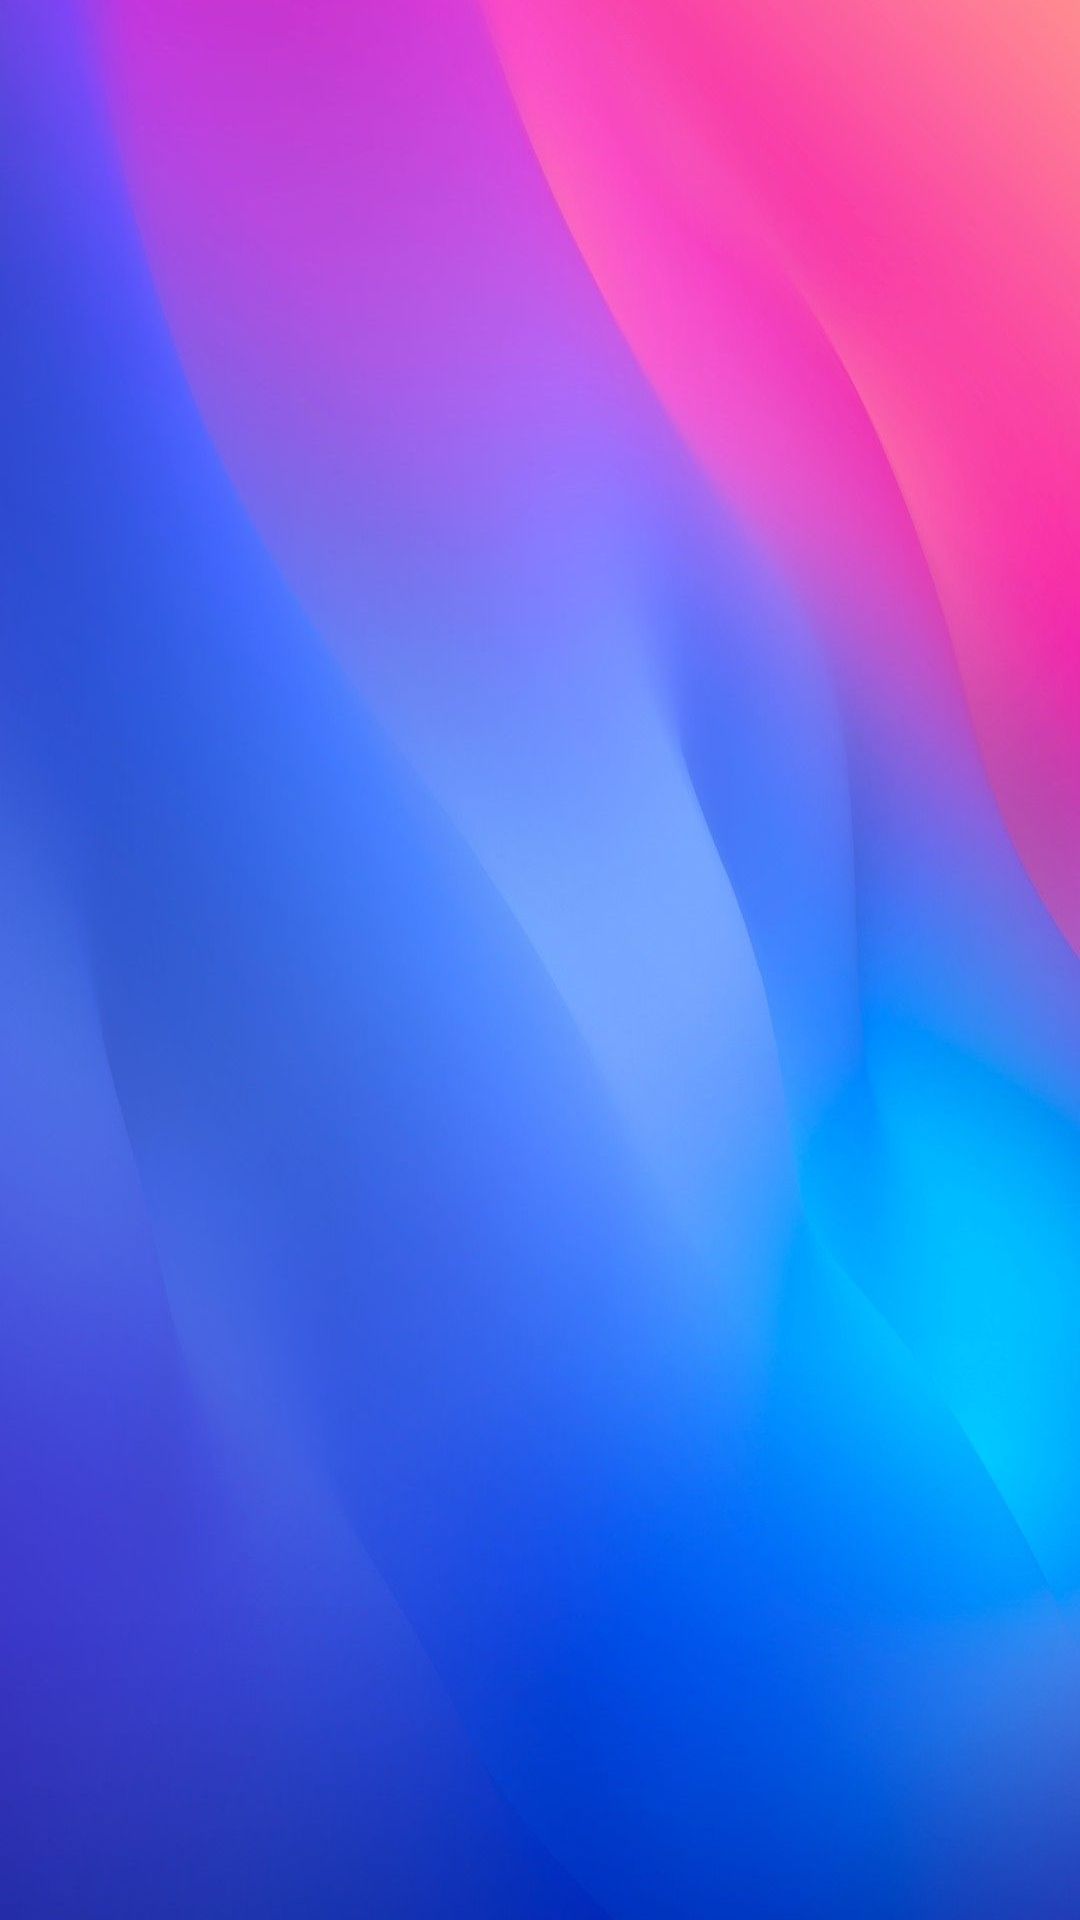 Free download iOS 12 iPhone X blue pink clean simple abstract